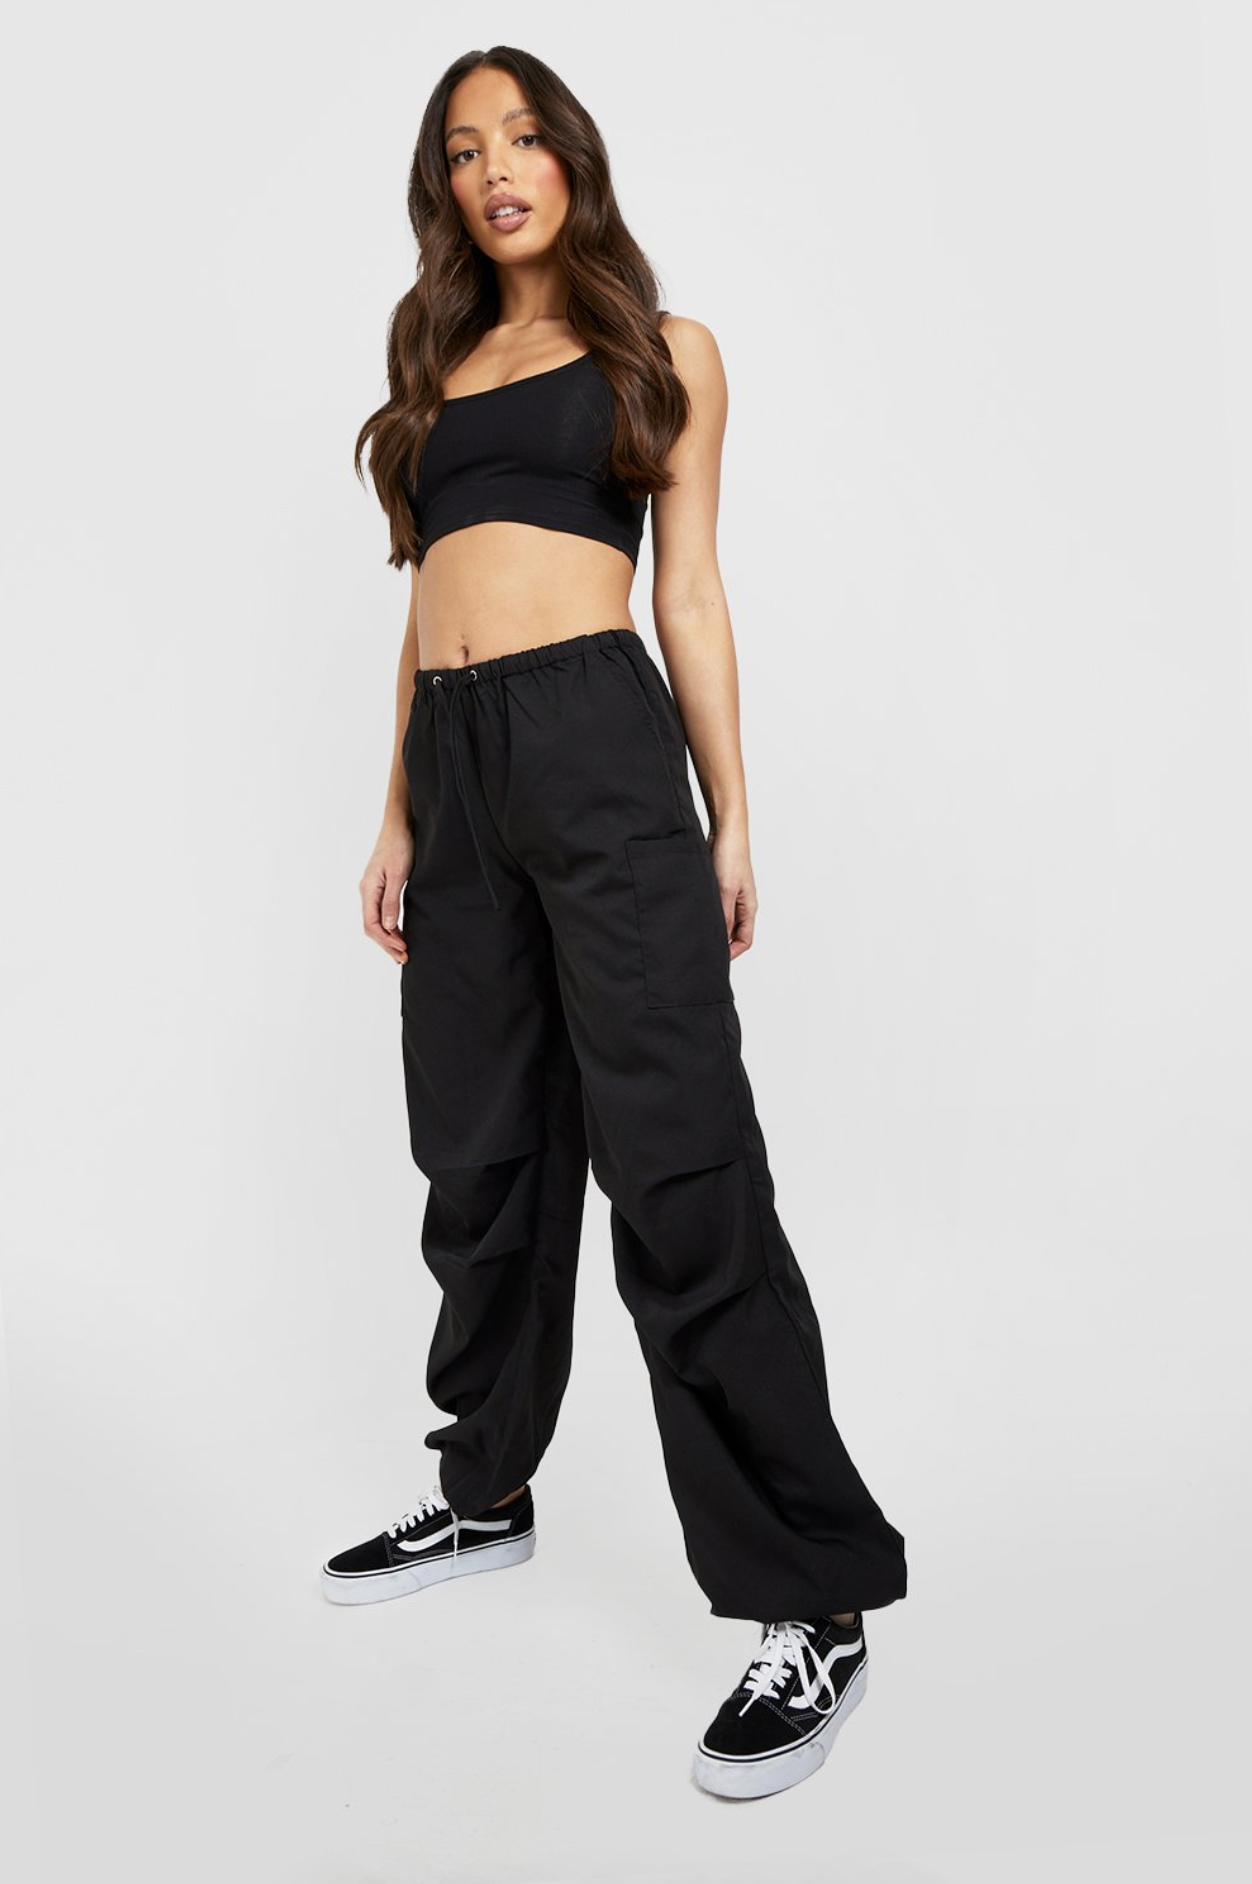 Nylon parachute trousers with pockets - SALE up to 40% off - BSK Teen |  Bershka